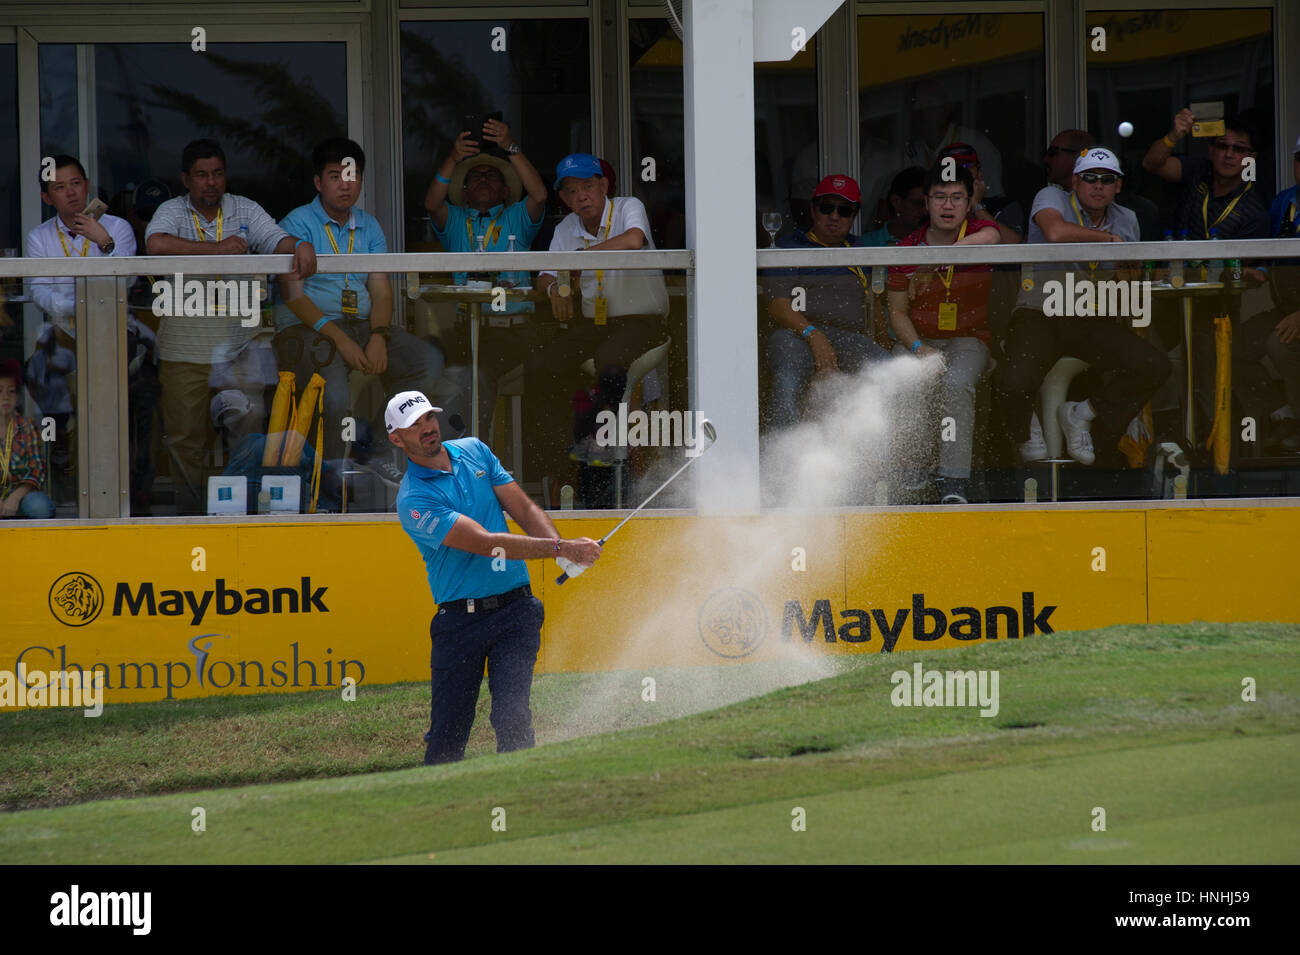 Kuala Lumpur, Malaysia. 12th Feb, 2017 Maybank Golf Championship, European Tour, Havret chips out of the bunker at 18 during the final round at the Maybank Championship at the Saujana Golf & Country Club, Kuala Lumpur, Malaysia. Credit: Flashspix/Alamy Live News Stock Photo